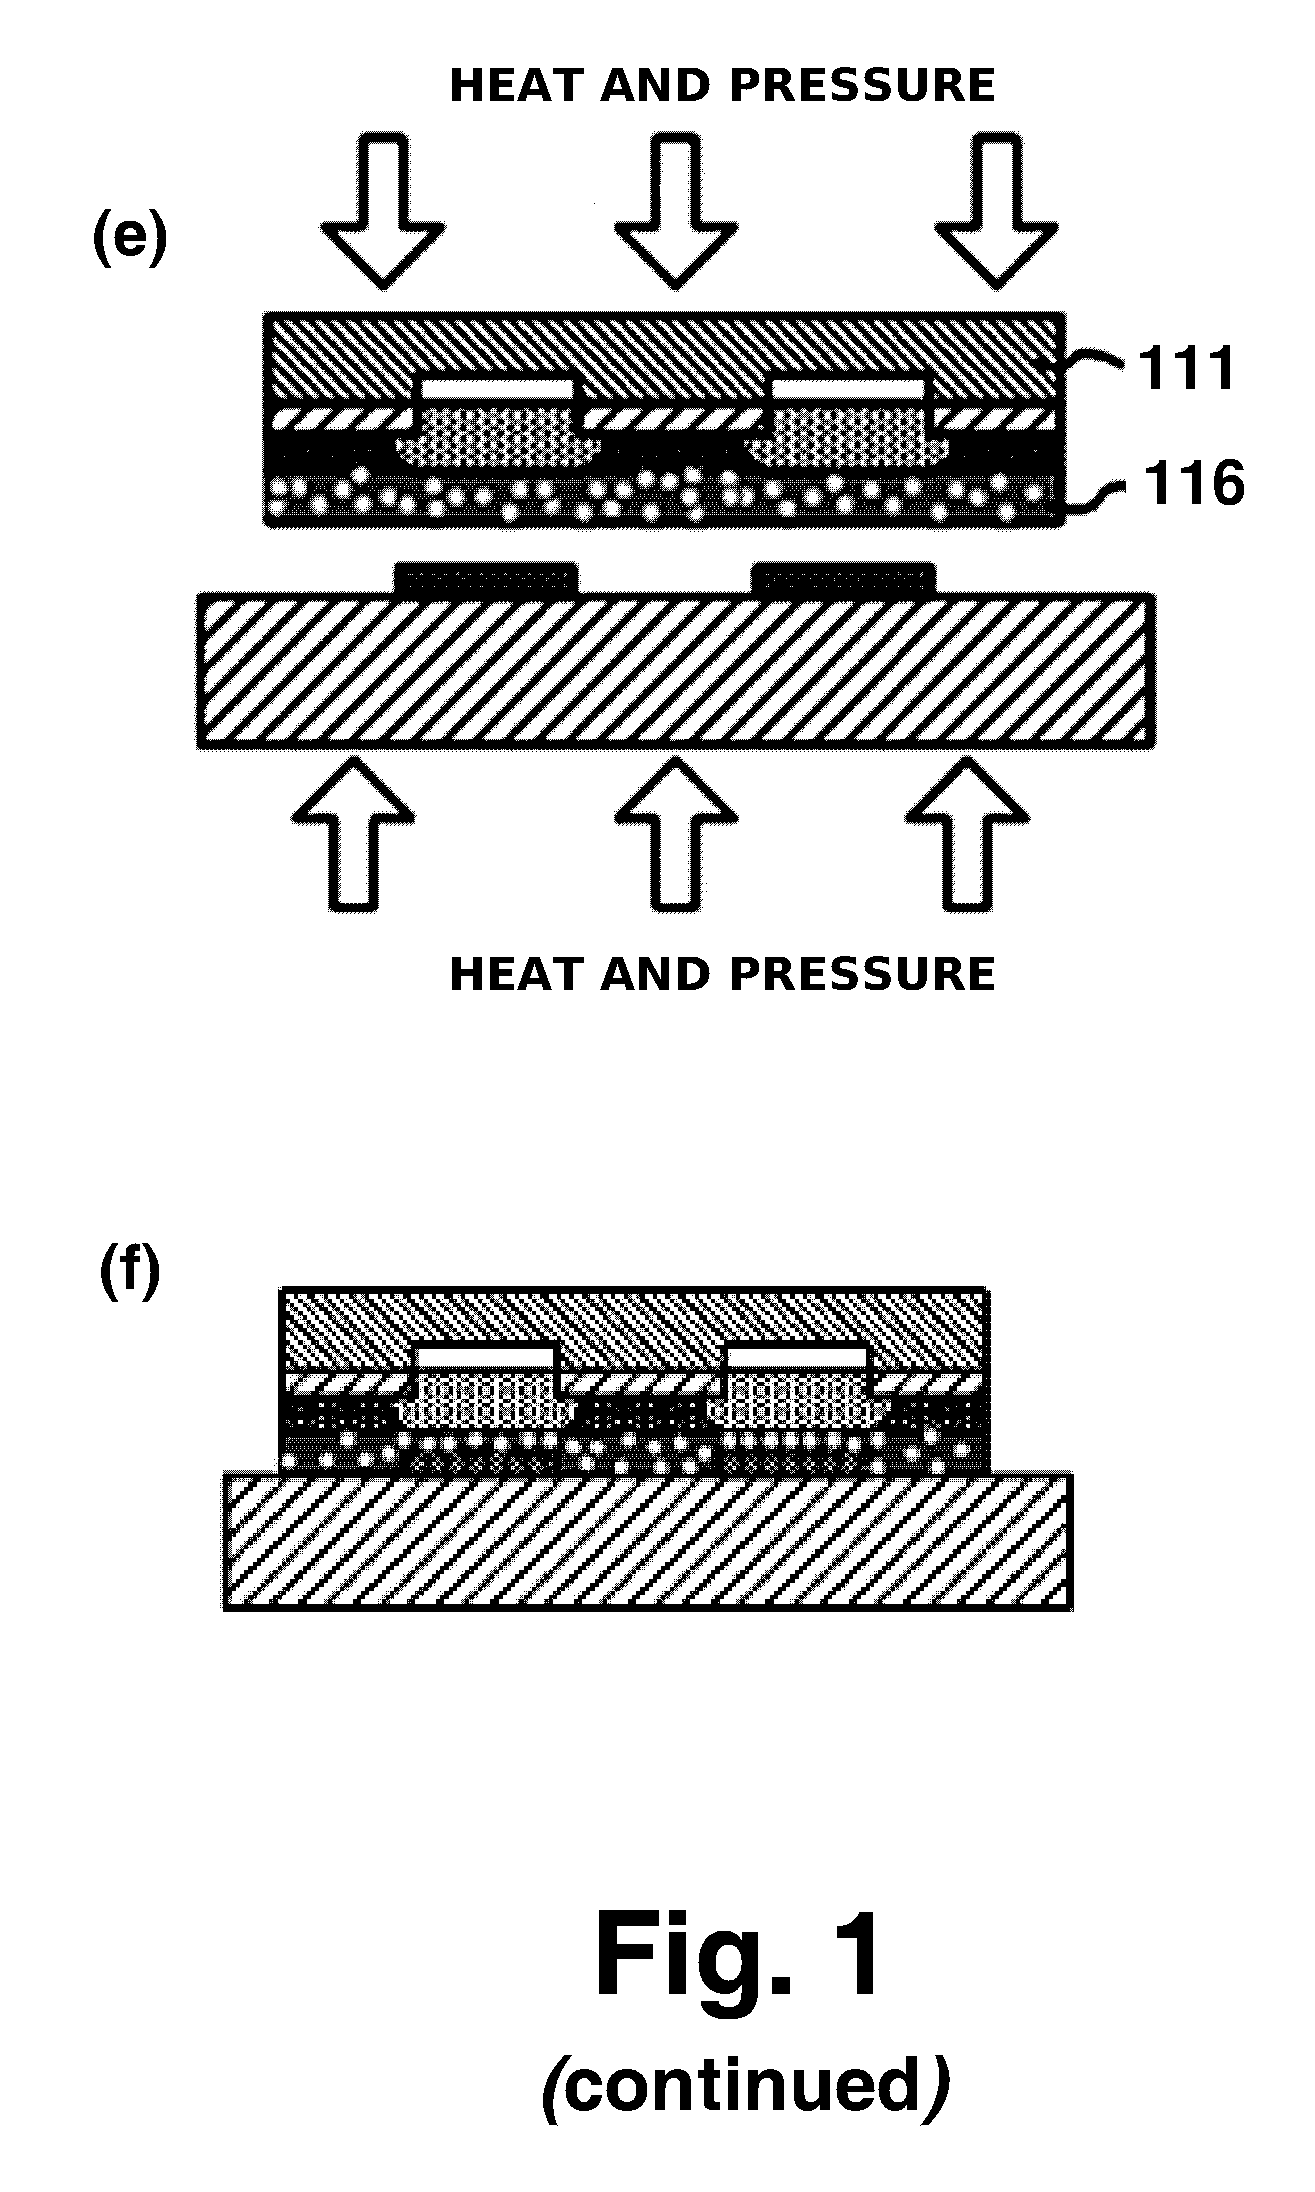 Wafer-level aca flip chip package using double-layered aca/nca